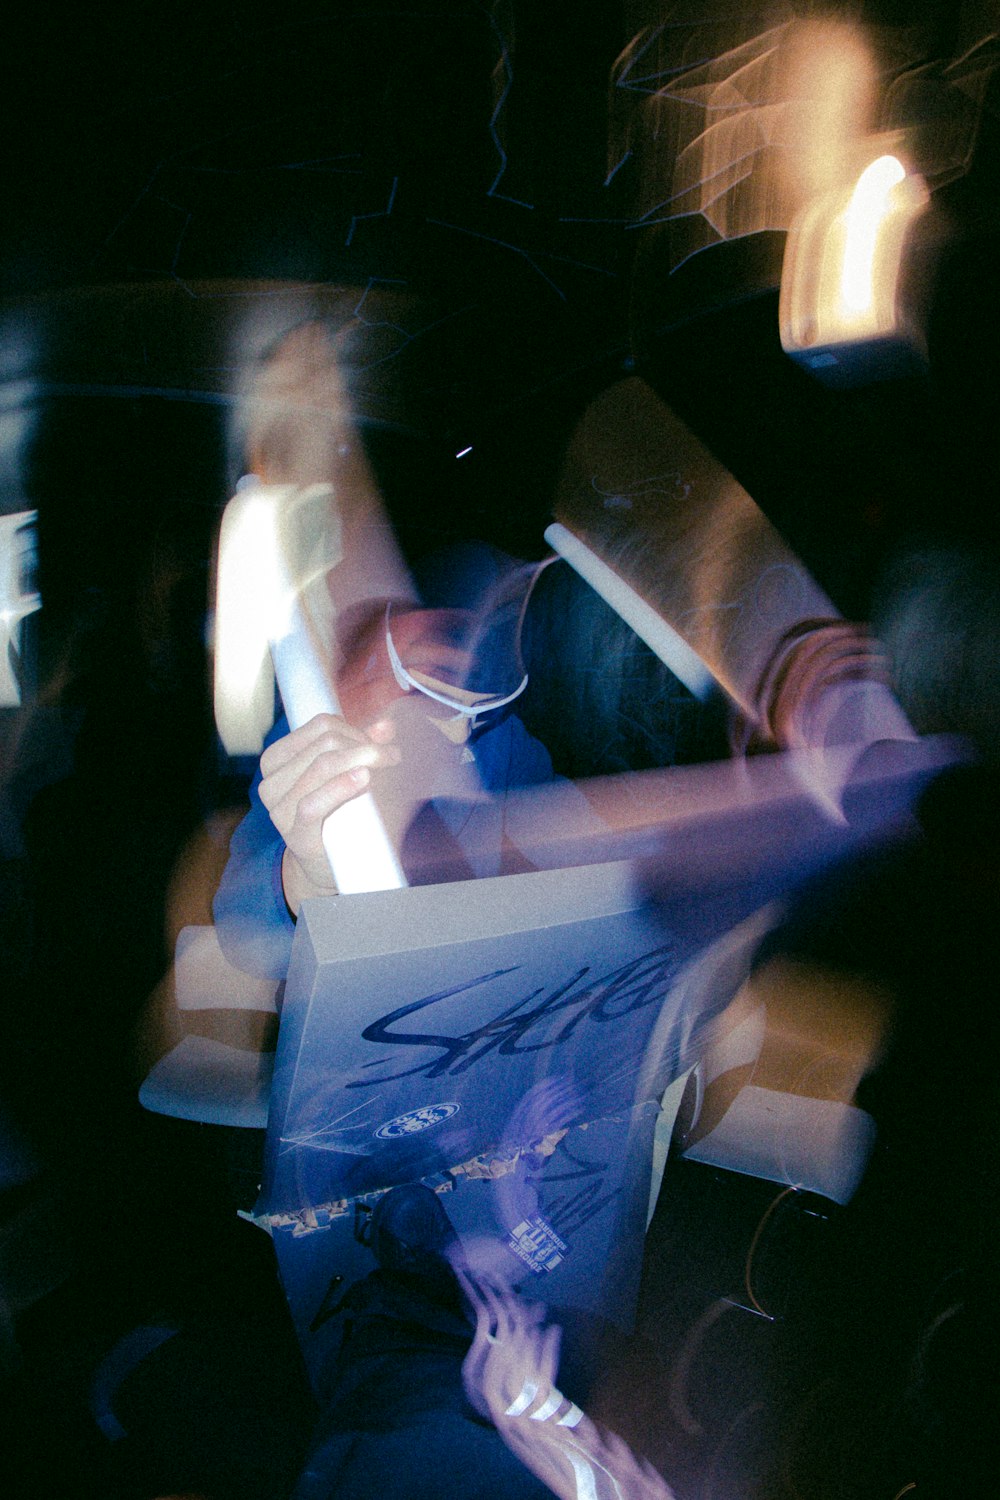 a blurry photo of a person holding a box